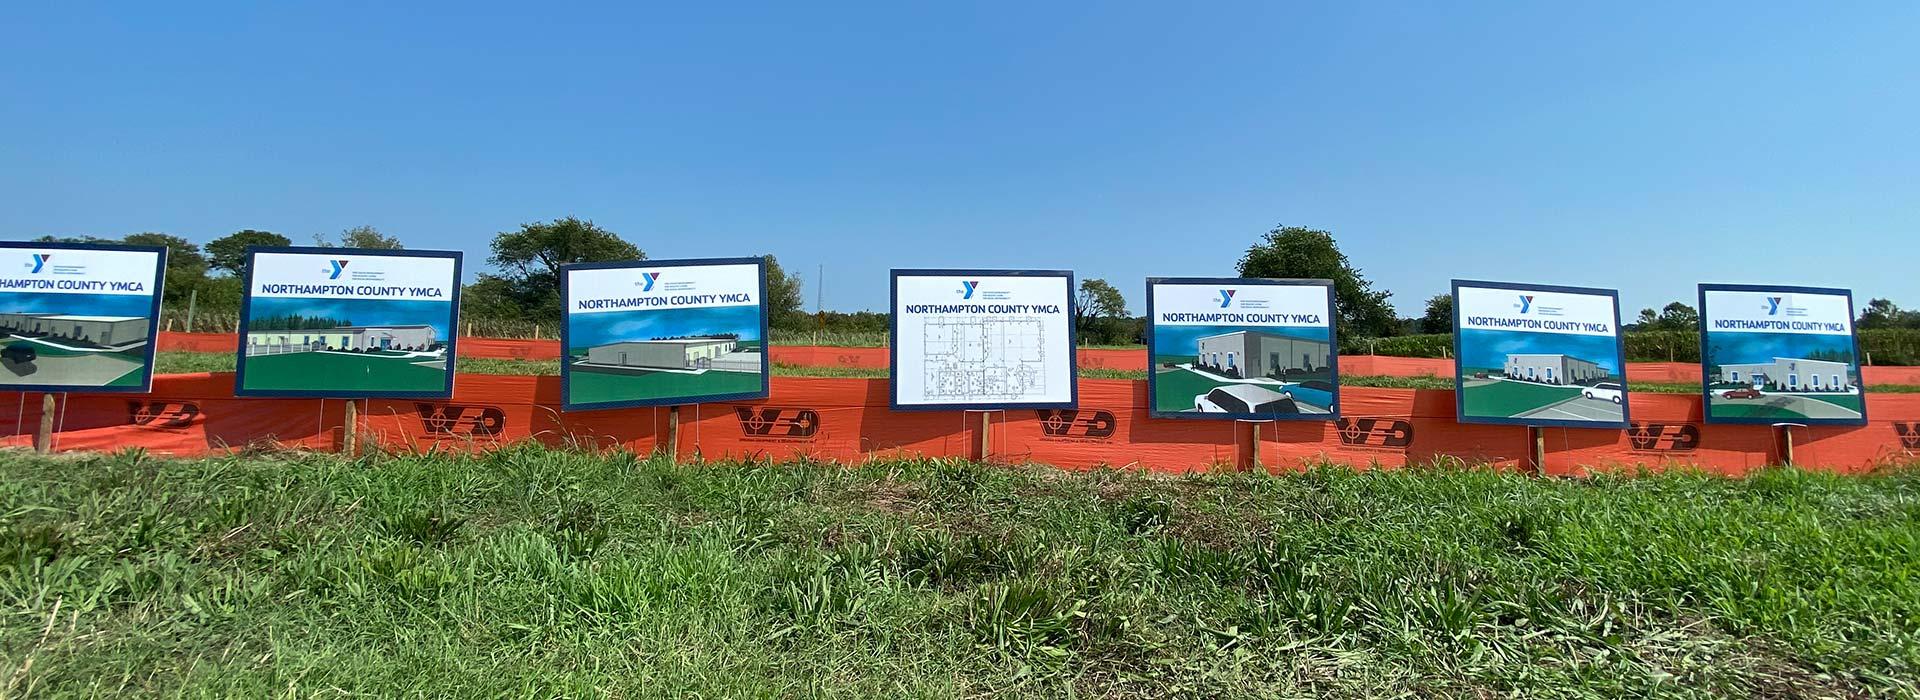 Artist rendering and floor plan signs in the grass at the groundbreaking ceremony for the Northampton County YMCA.